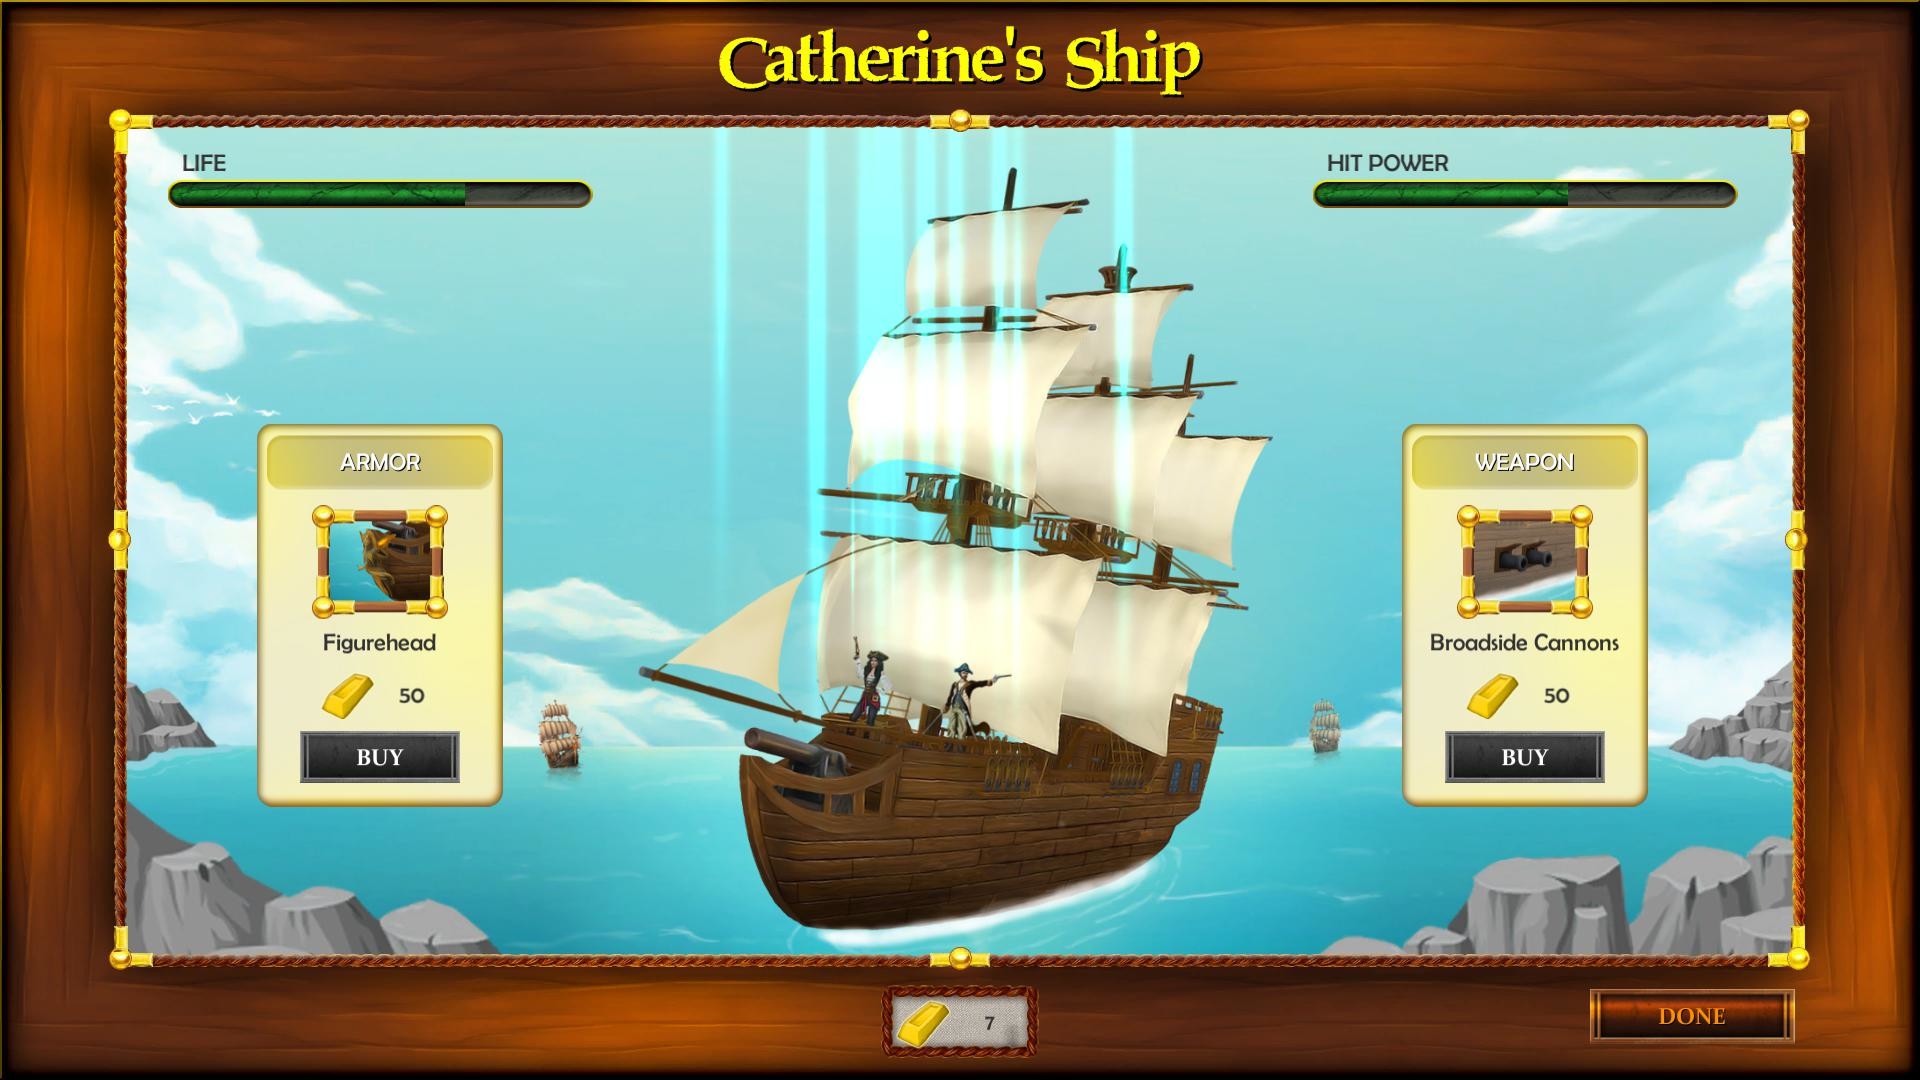 Catherine Ragnor and the Legend of the Flying Dutchman Free Download